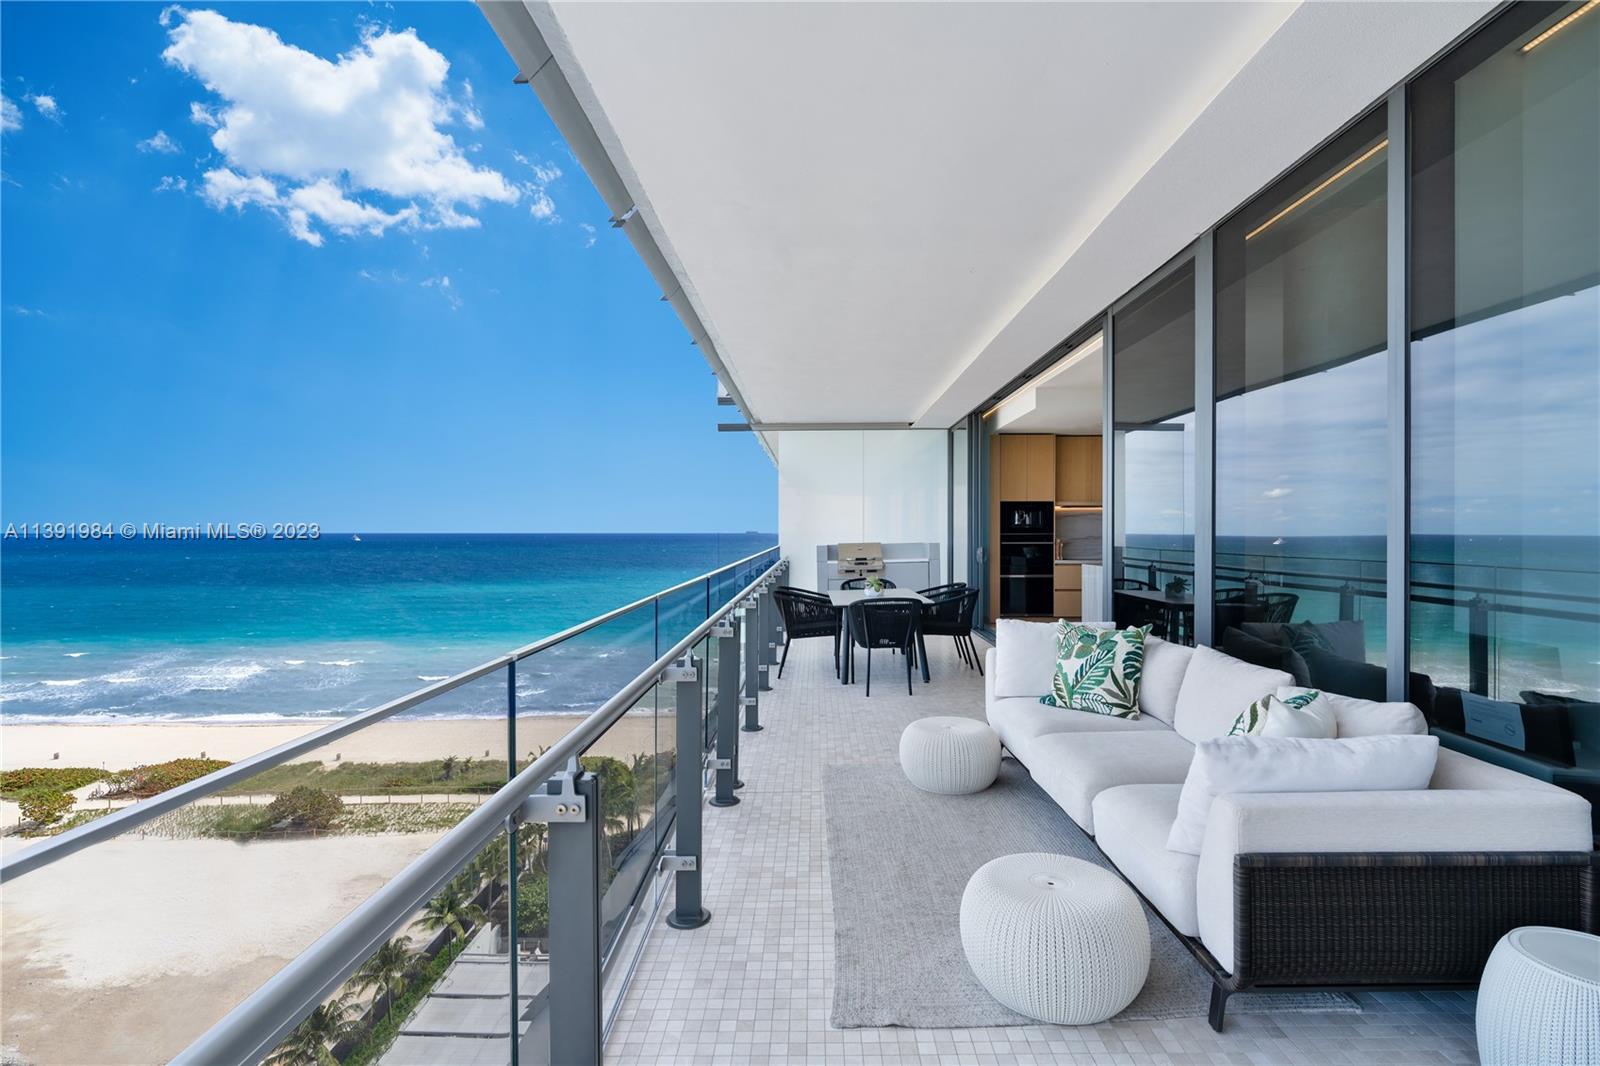 Stunning 03 line residence with ocean views in this new luxury condominium. Eighty Seven Park completed in 2020 by master architect Renzo Piano sits directly on the sands of Miami Beach. This 1 bedroom, 1.5 bath condo filled with natural lighting, wood and tile flooring, and cozy kitchen with snack bar. Open and large balcony perfect to entertain guests. Eighty Seven Park is conveniently located in North Beach, a fifteen minute drive from glamour, excitement, and energy of South Beach and Bal Harbour Shops.